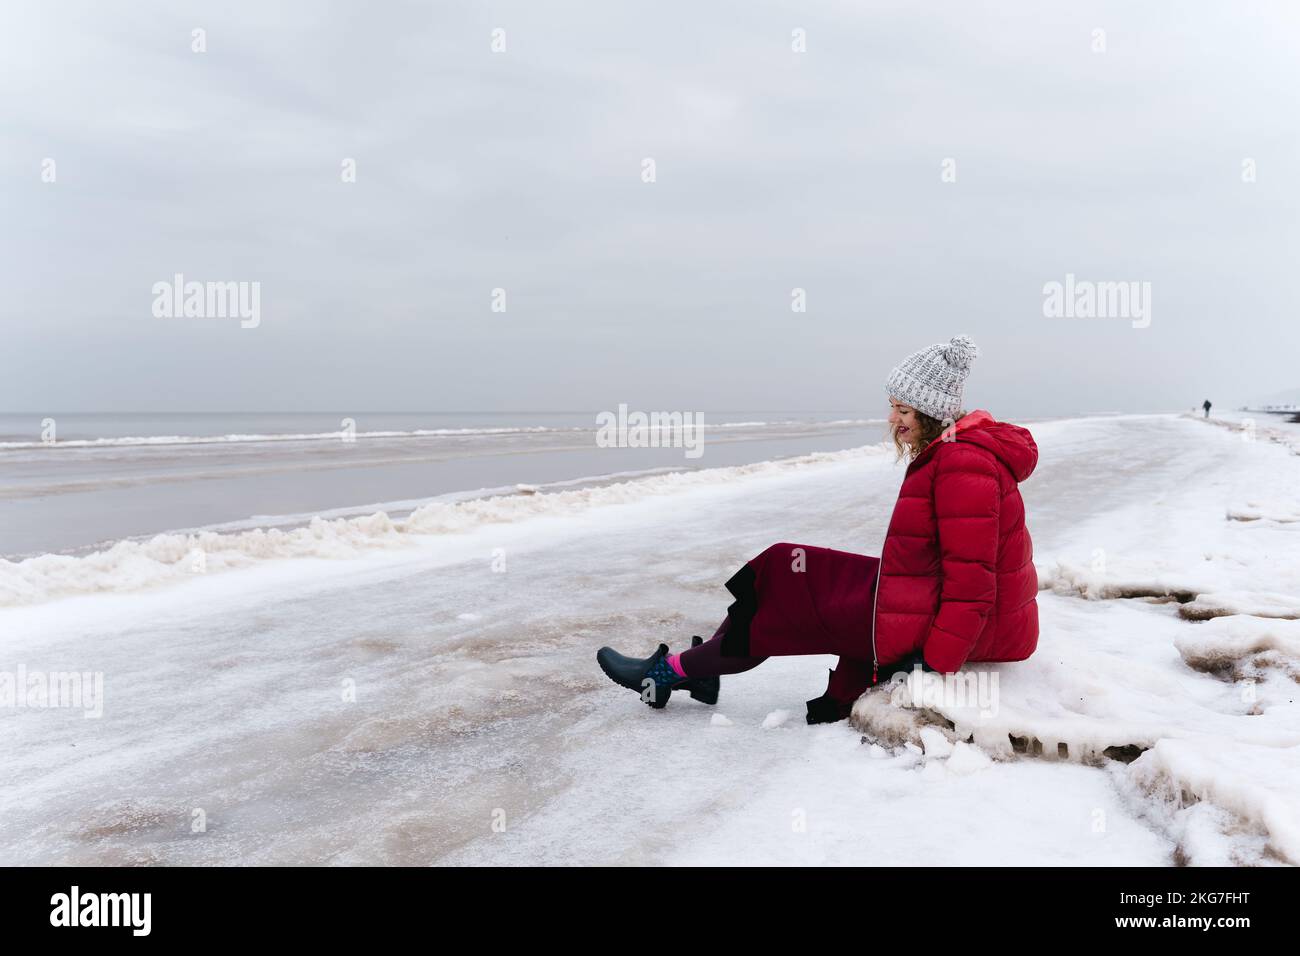 A cheerful woman in a red jacket and a warm dress sits on the shore of the winter sea. Stock Photo